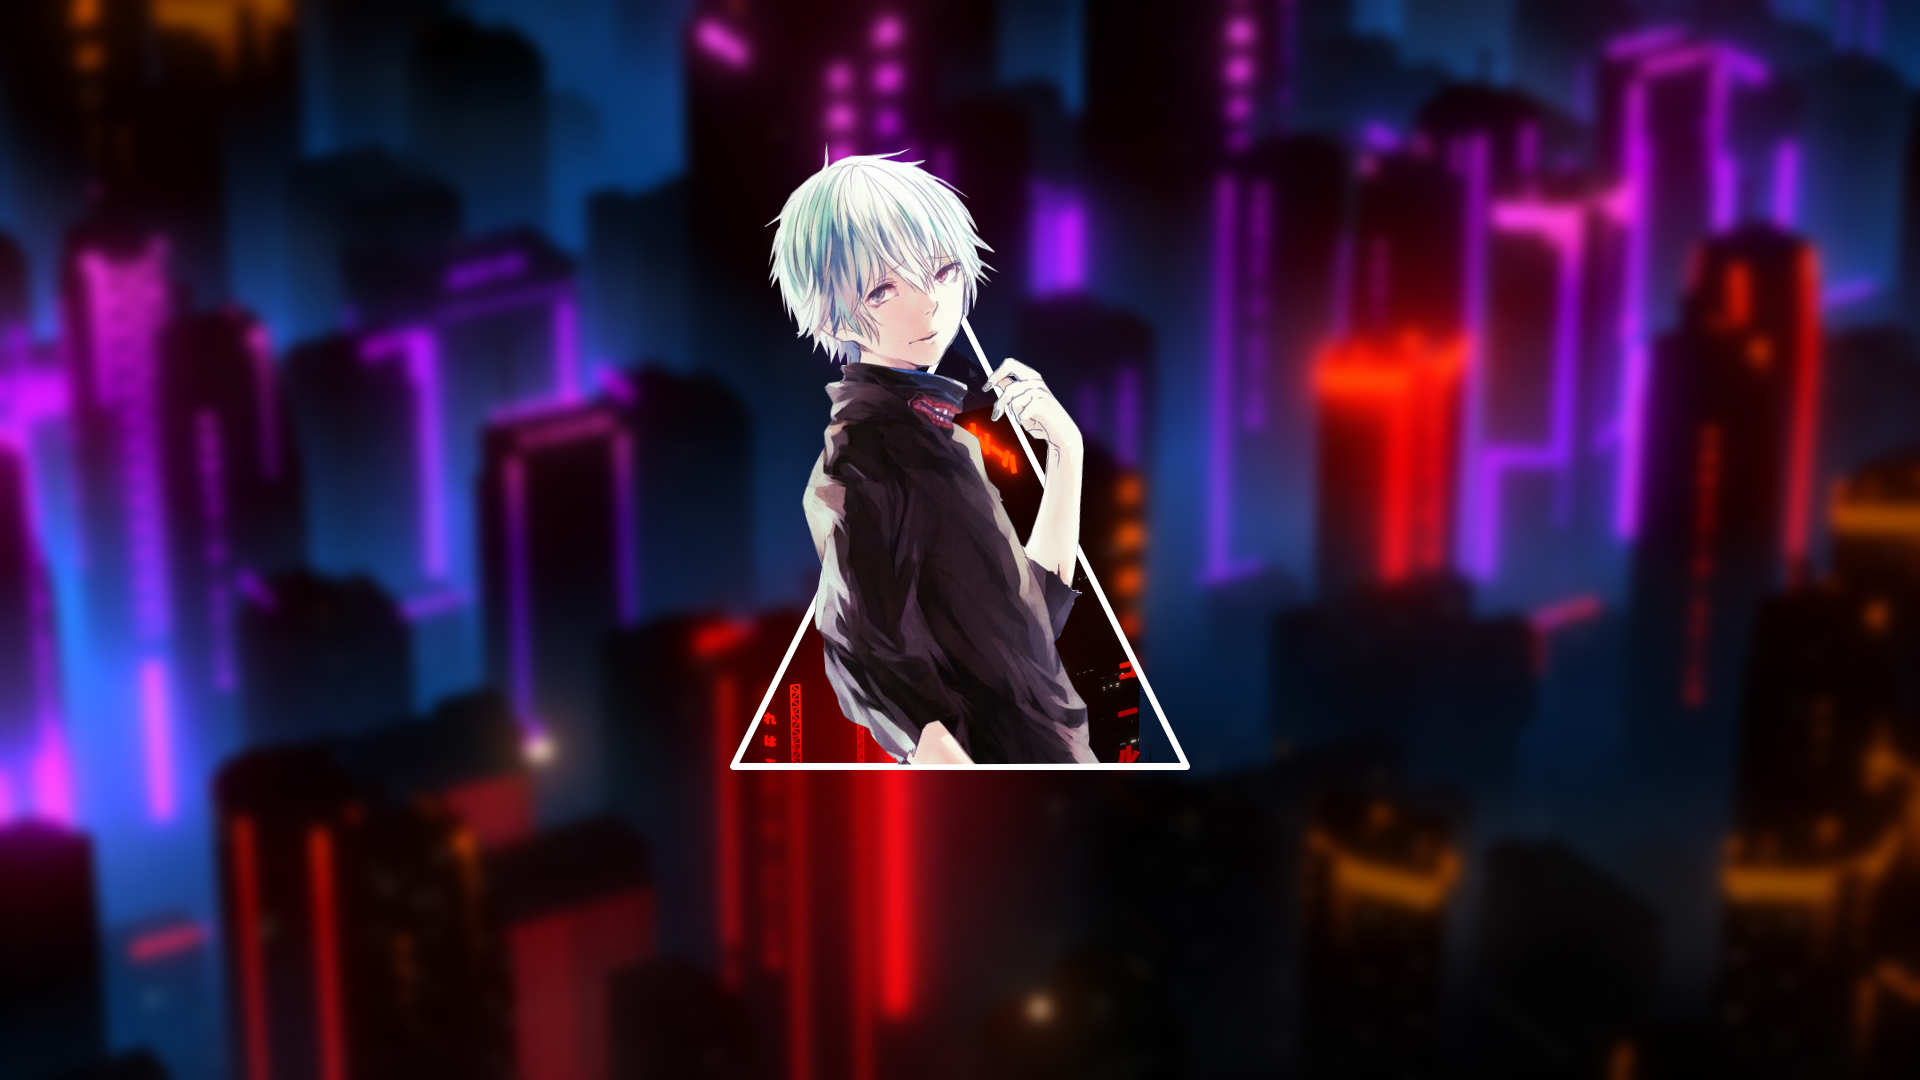 Anime 1920x1080 picture-in-picture Kaneki Ken anime boys Tokyo Ghoul Tokyo Ghoul:re